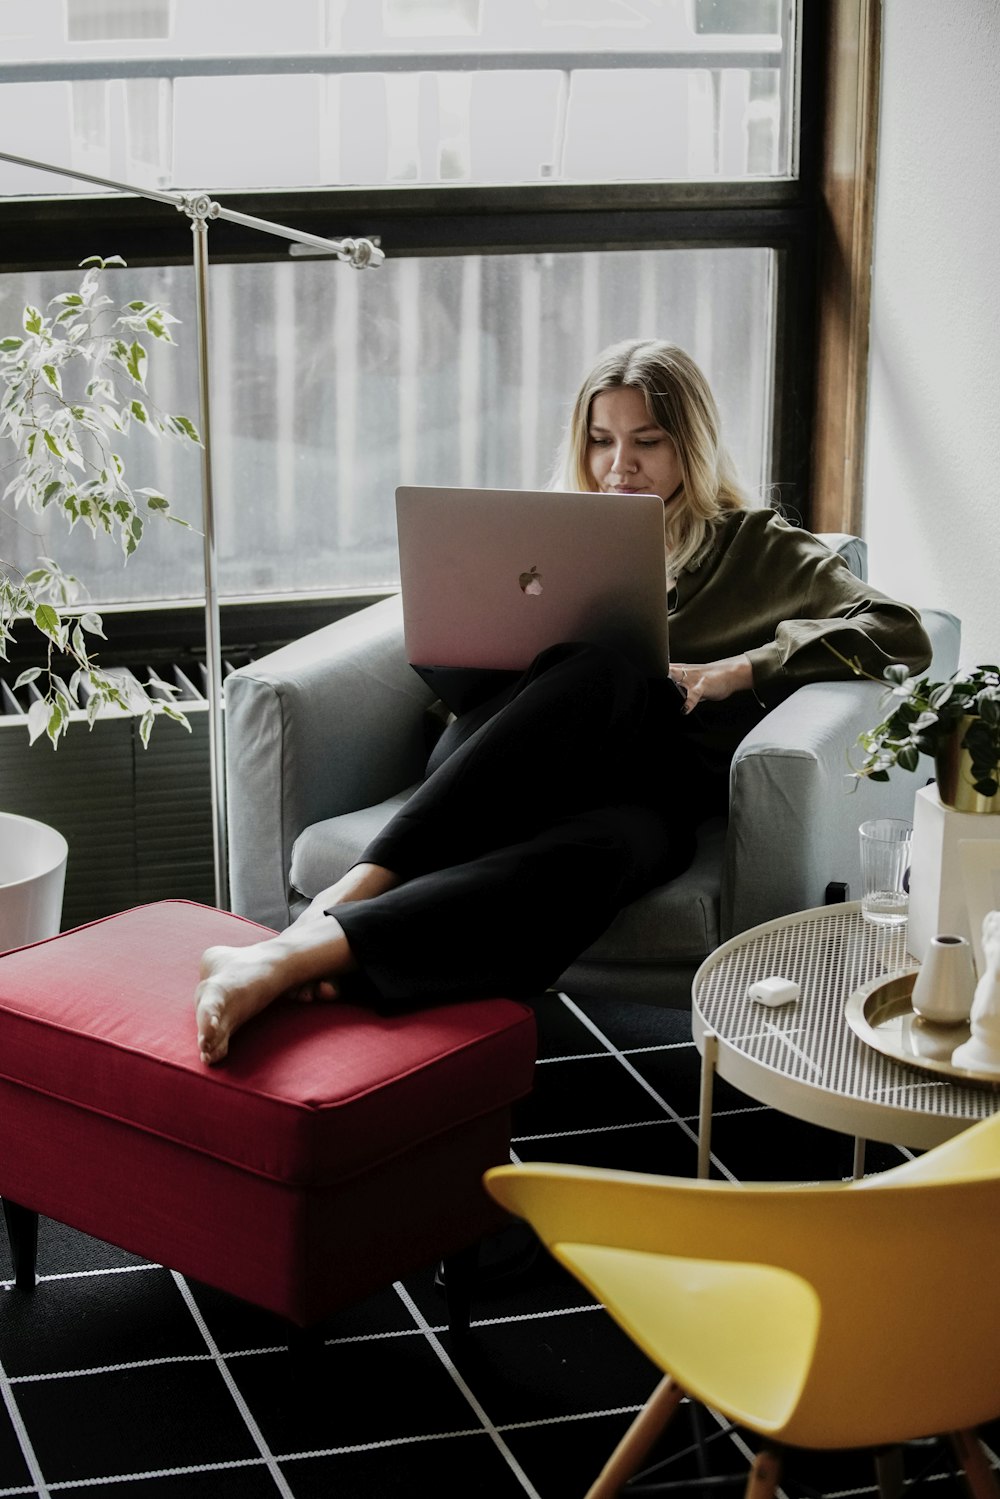 woman in white shirt and black pants sitting on red sofa using macbook